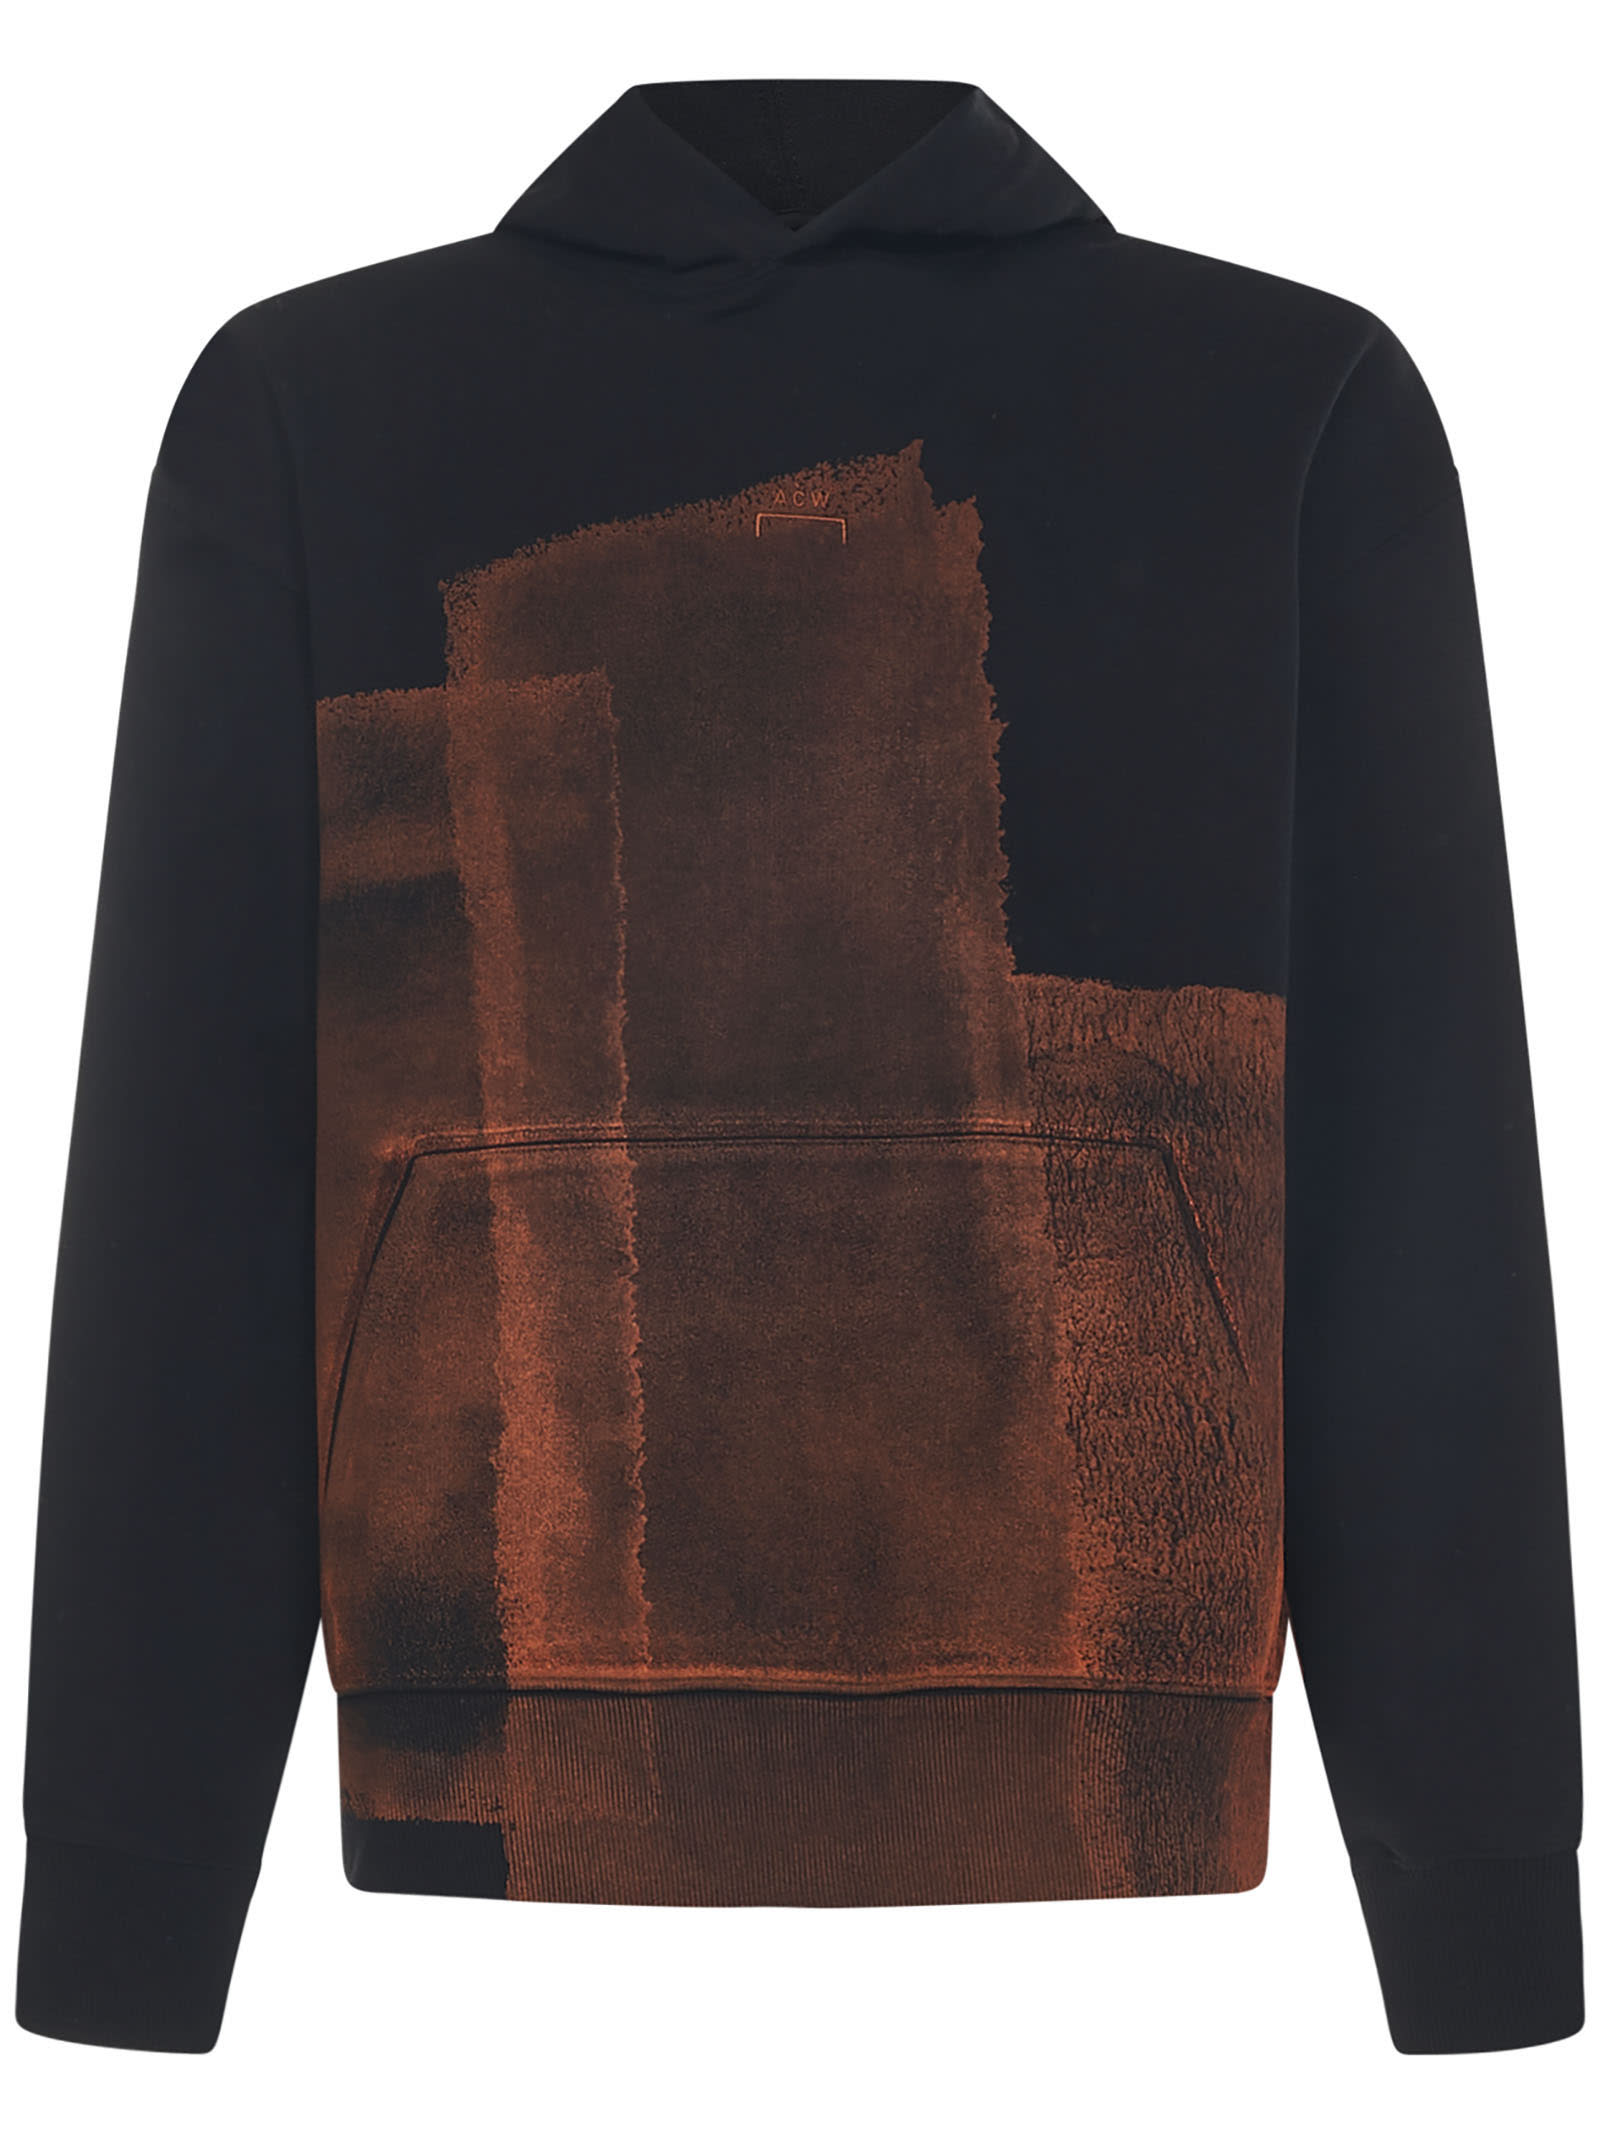 A-COLD-WALL* COLLAGE SWEATSHIRT